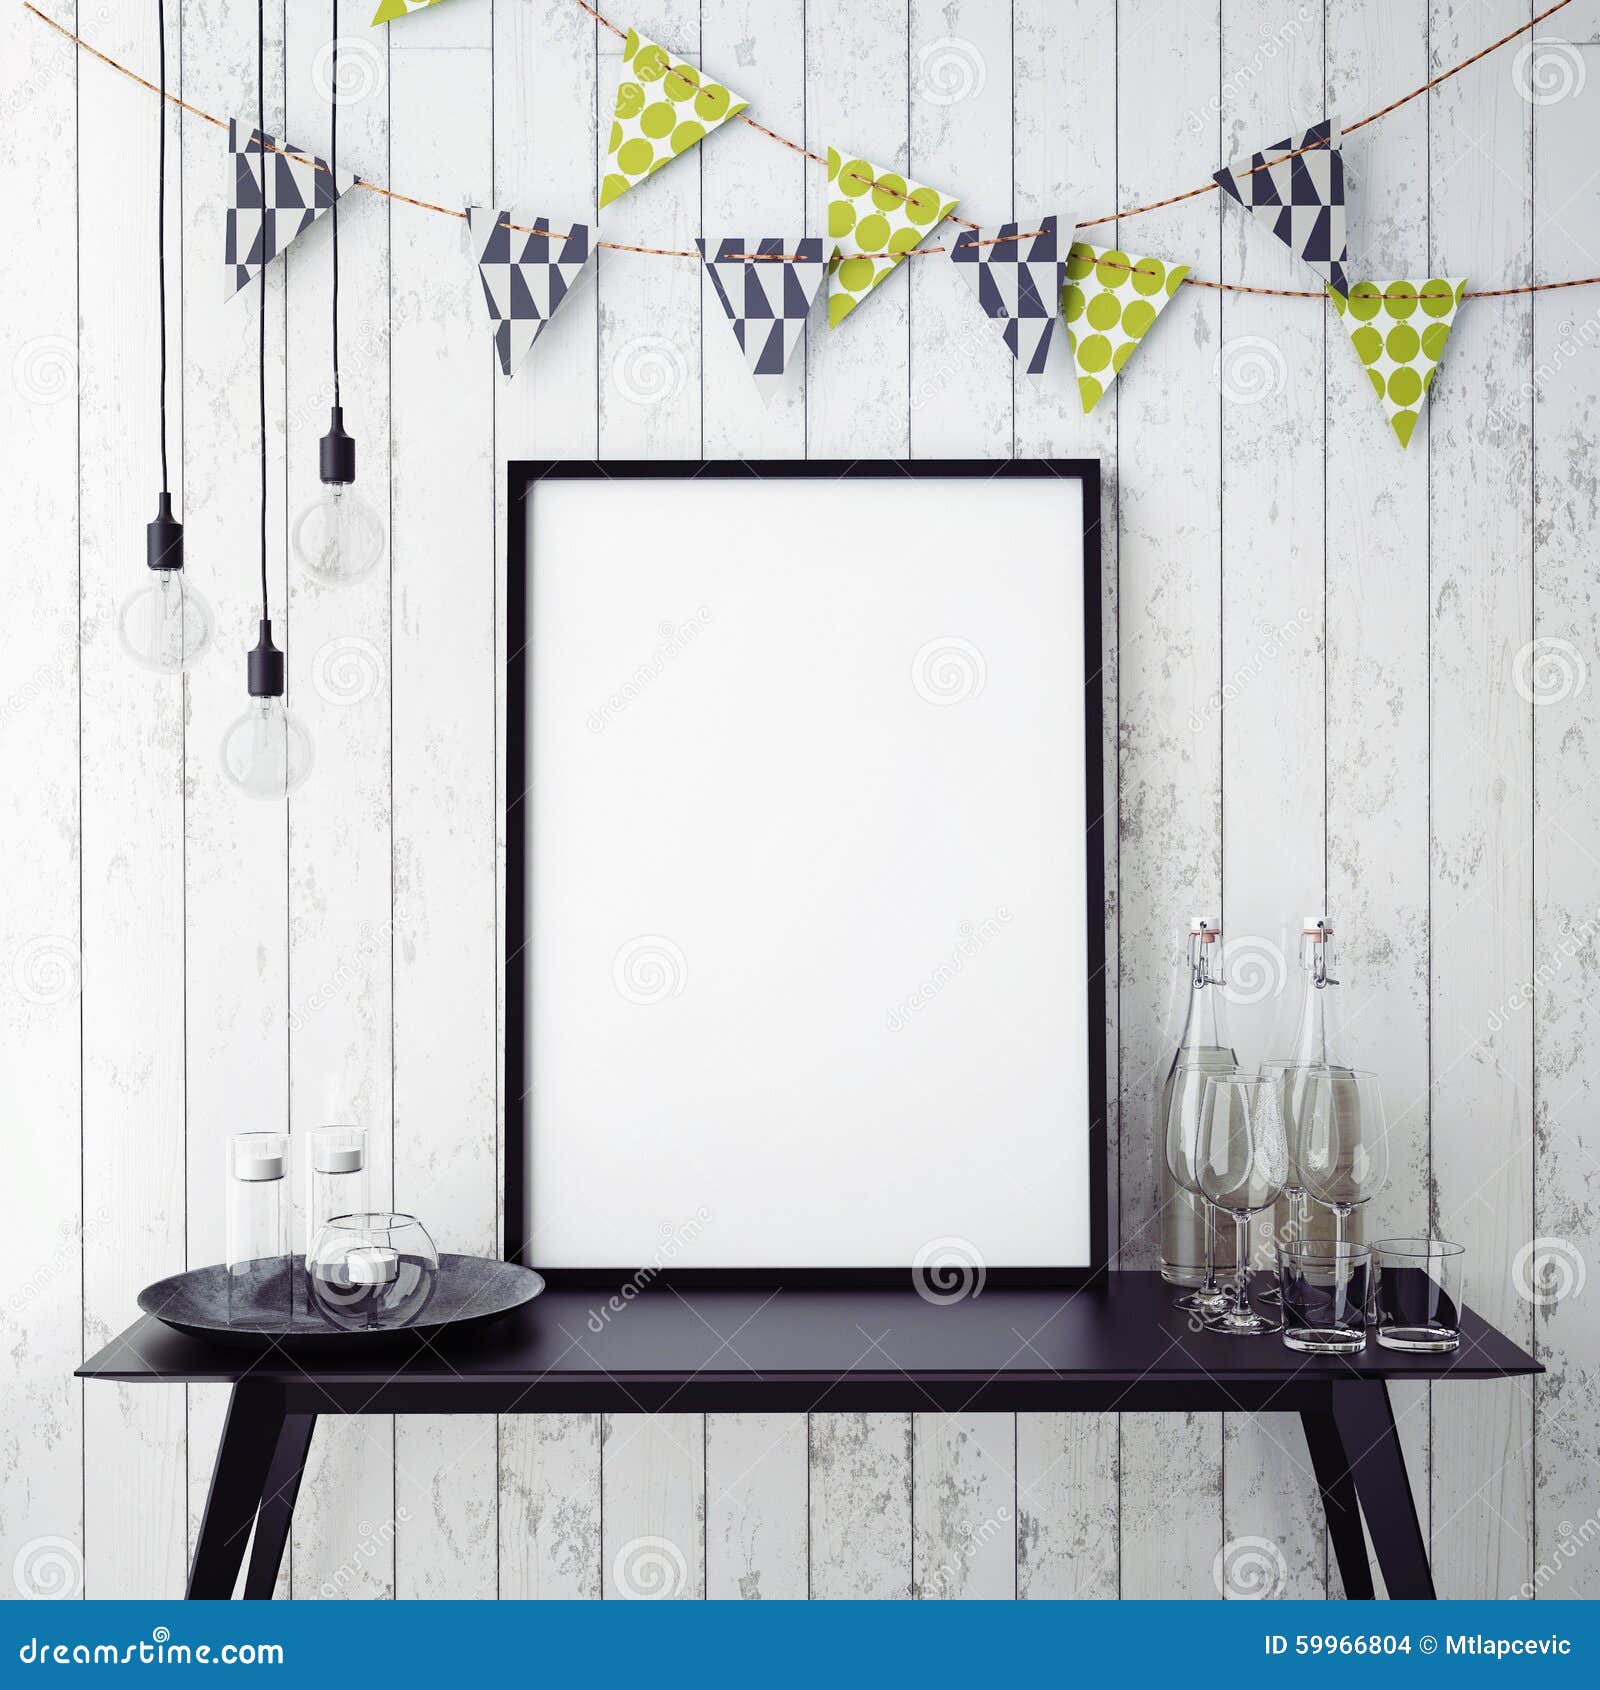  Mock Up  Poster In Interior Background With Party  